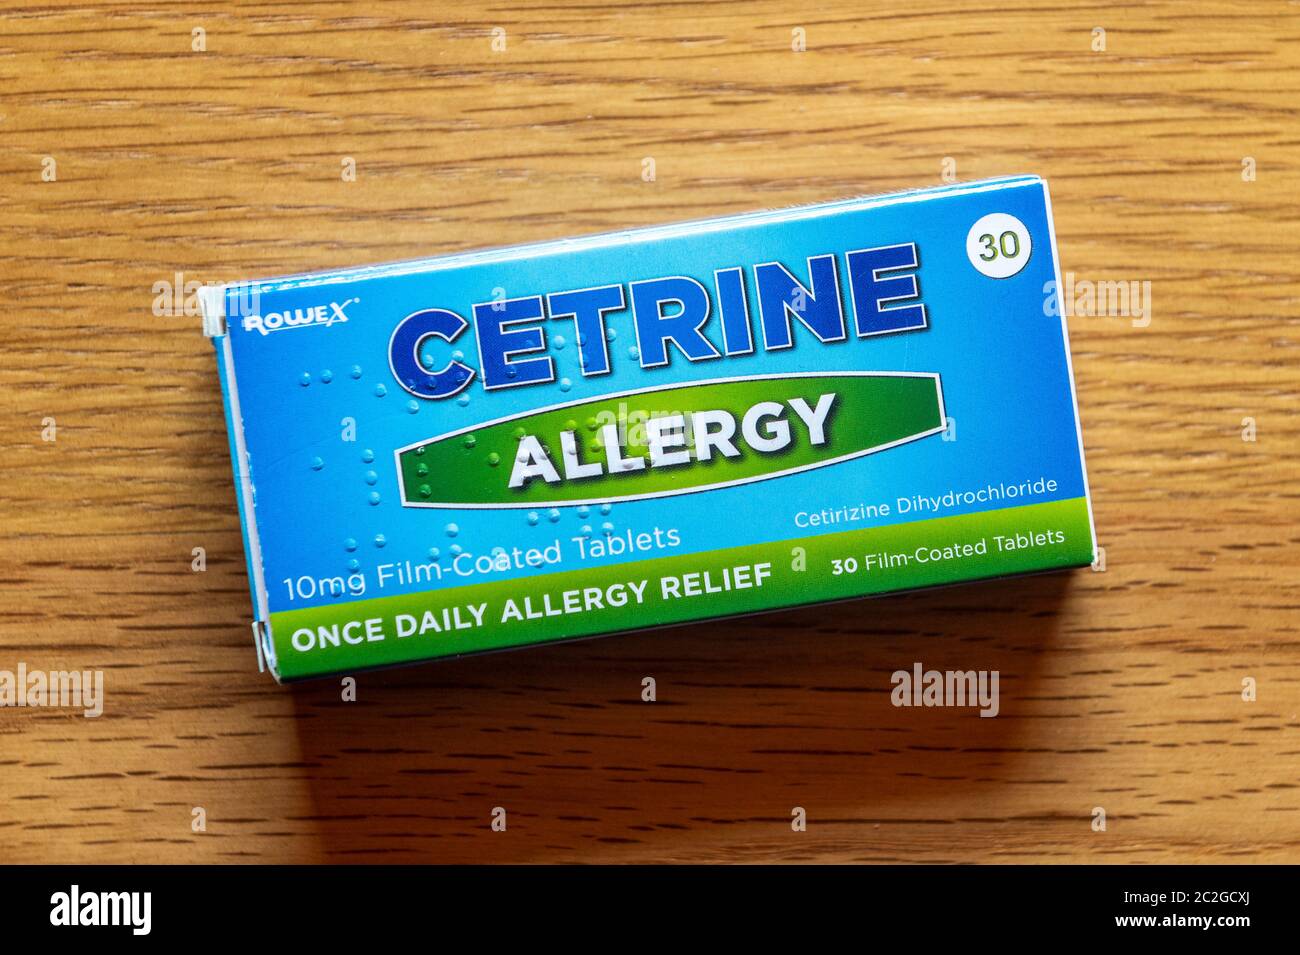 Box of 30 Cetrine Allergy Hay Fever Tablets made by Rowex. THIS IS A PICTURE, NOT THE PRODUCT. Stock Photo